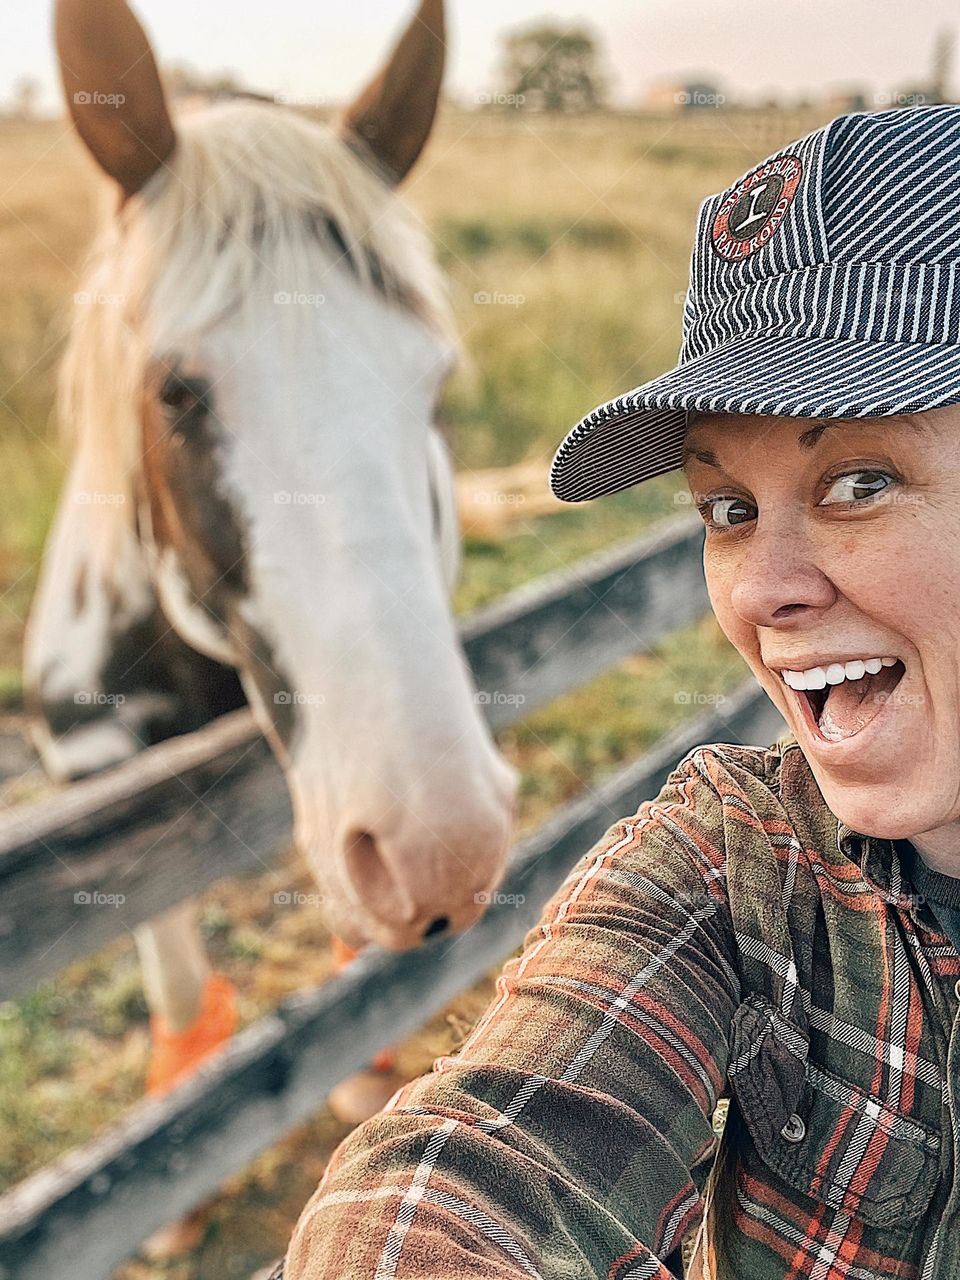 Woman takes selfie with a horse, taking selfies with horses, selfies on farms, woman and horses taking selfies, horse wants a selfie with woman, woman wants a selfie with horse 